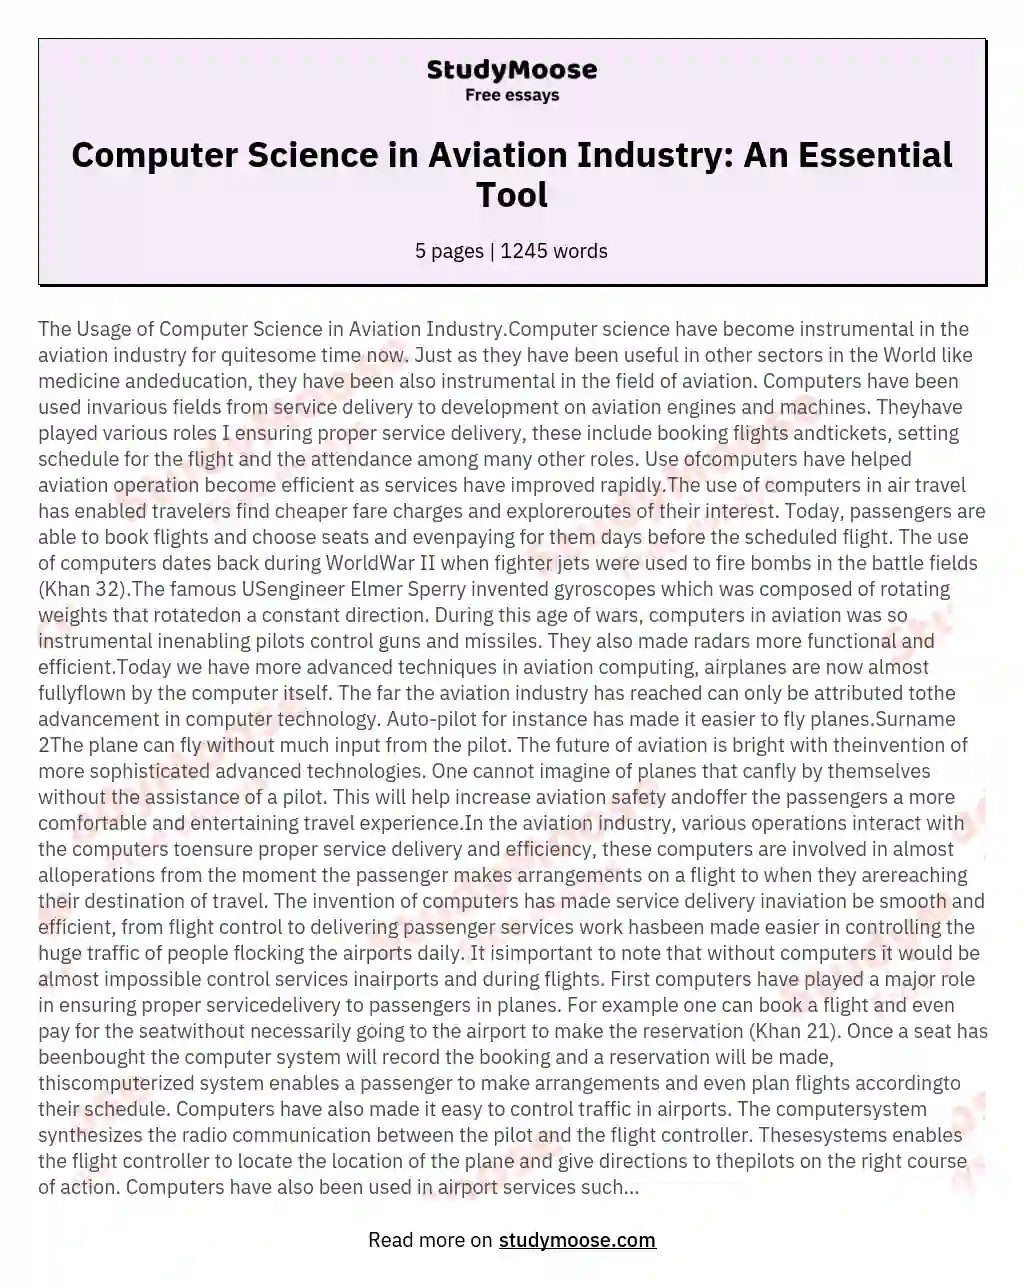 Computer Science in Aviation Industry: An Essential Tool essay